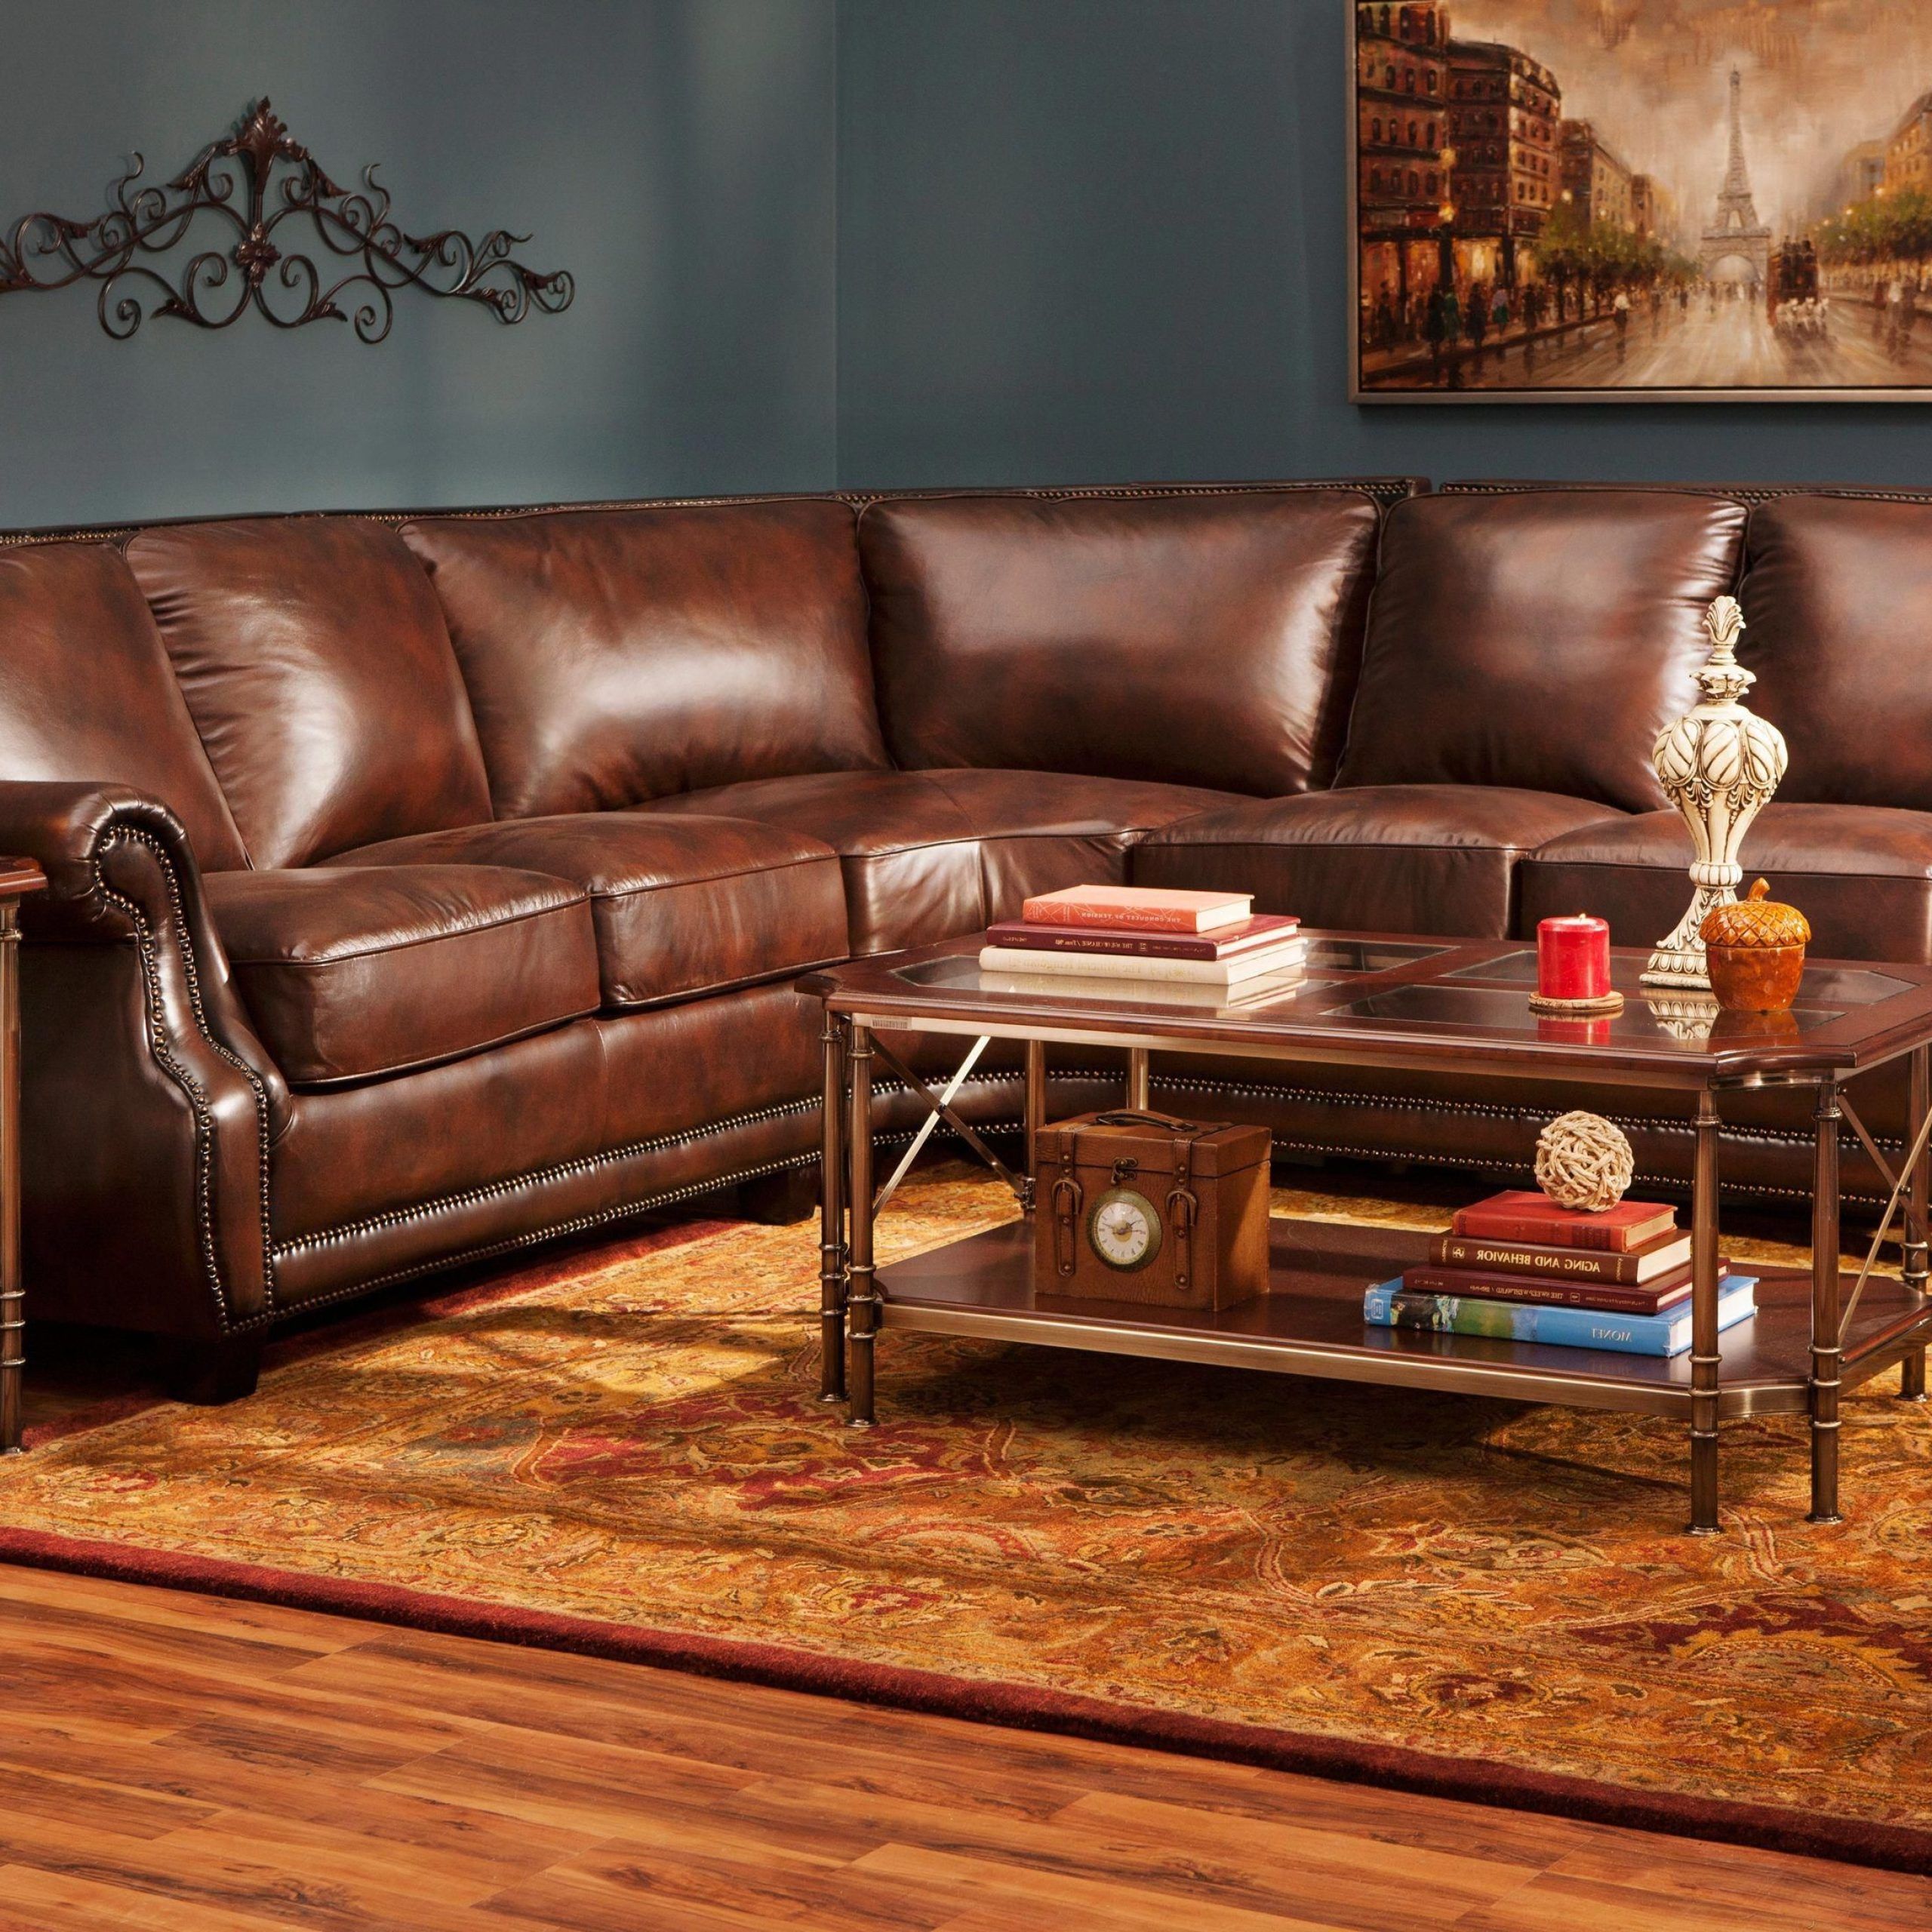 Preferred Taking Its Cues From The Classics, This Romano 3 Piece Leather Throughout 3 Piece Leather Sectional Sofa Sets (View 15 of 15)